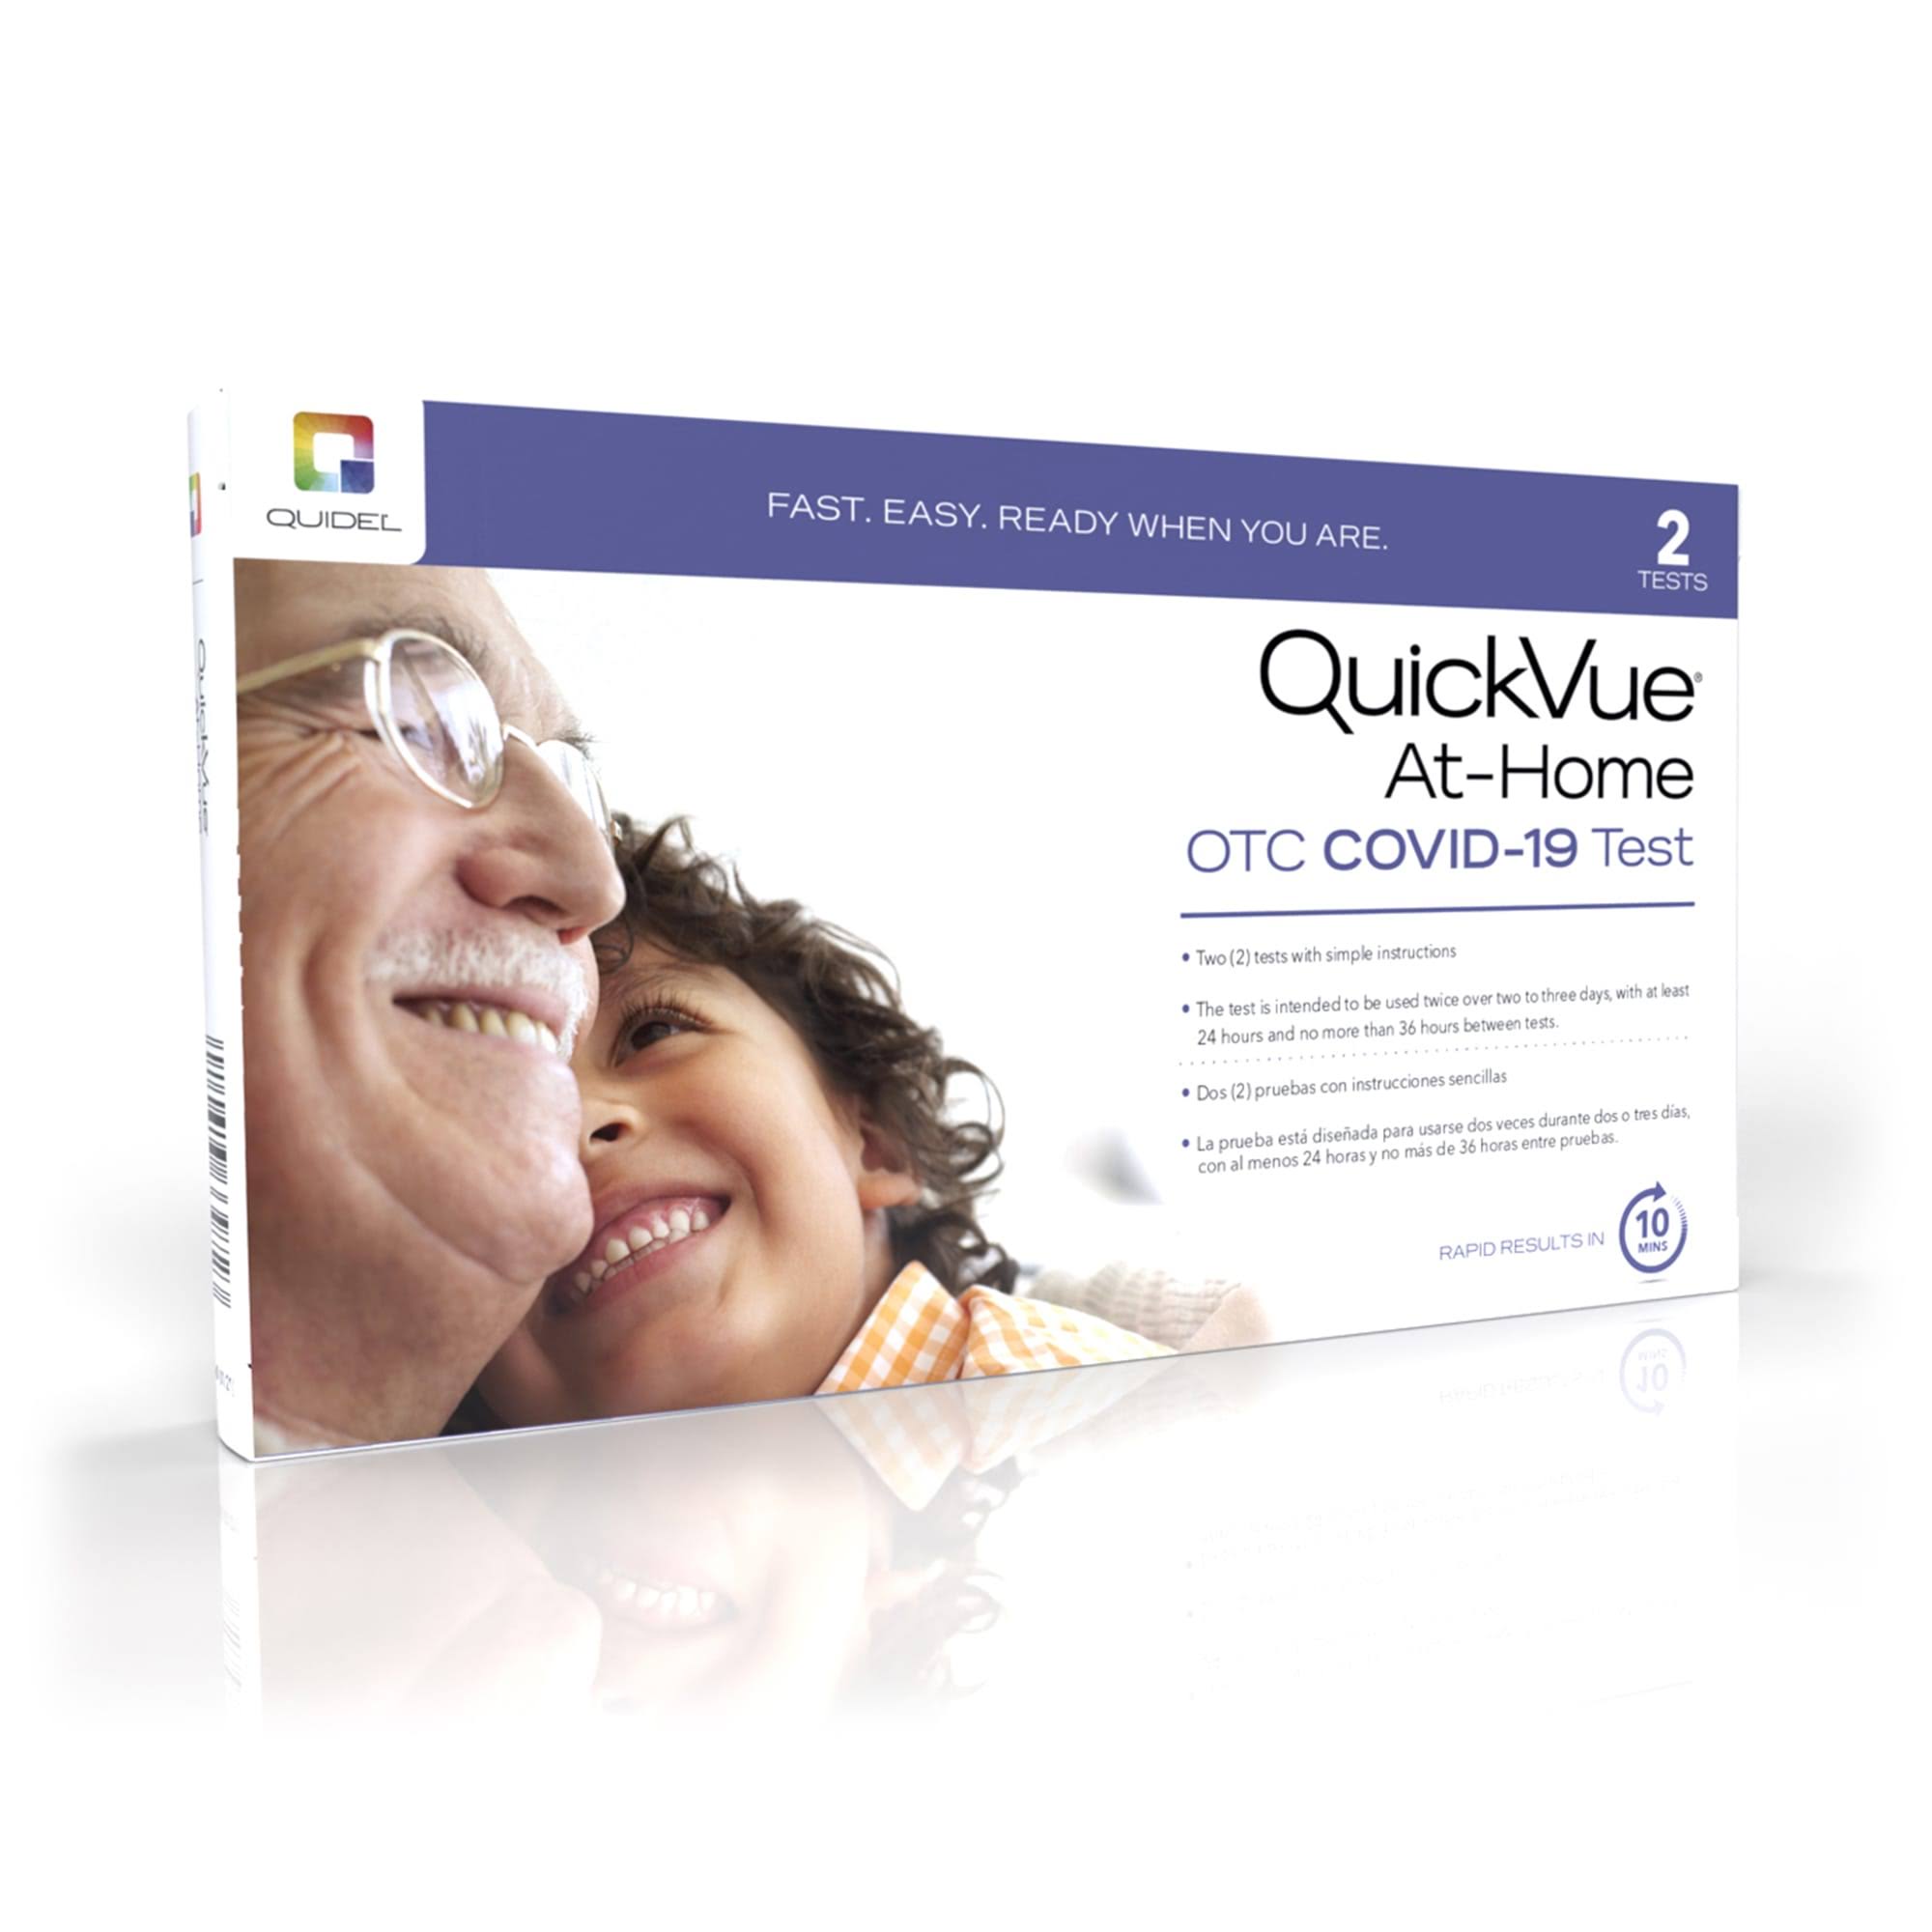 Quidel QuickVue At-home OTC Covid-19 Test Kit, Self-Collected Nasal Swab Sample, 10 Minute Rapid Results - Pack of 3 Kits